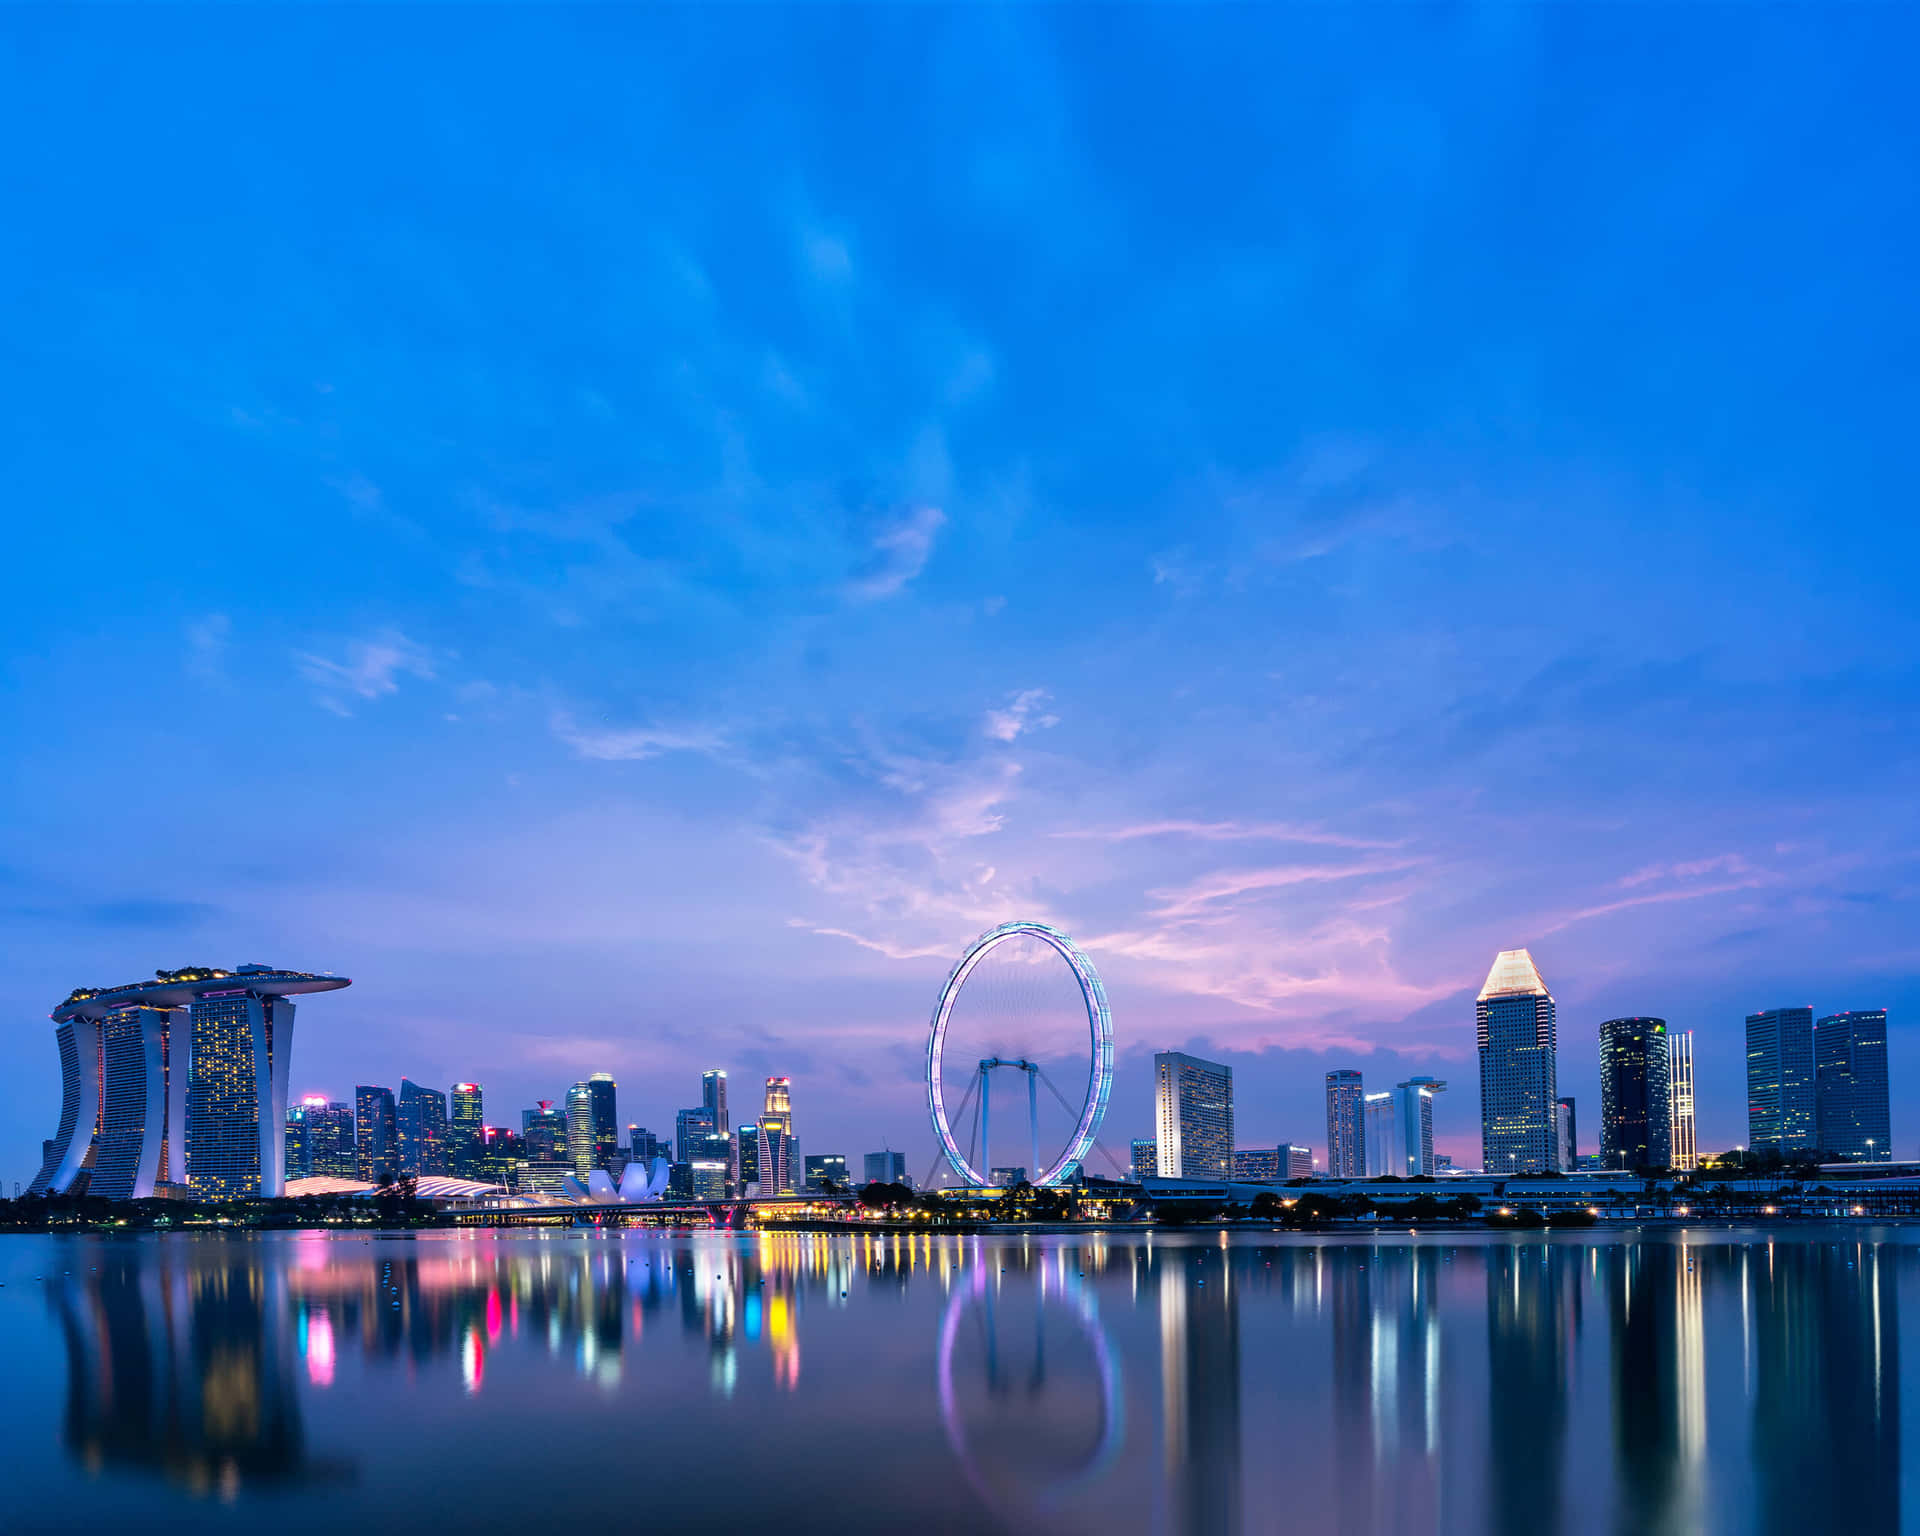 Singapore is a vibrant and bustling city, home to iconic buildings and attractions